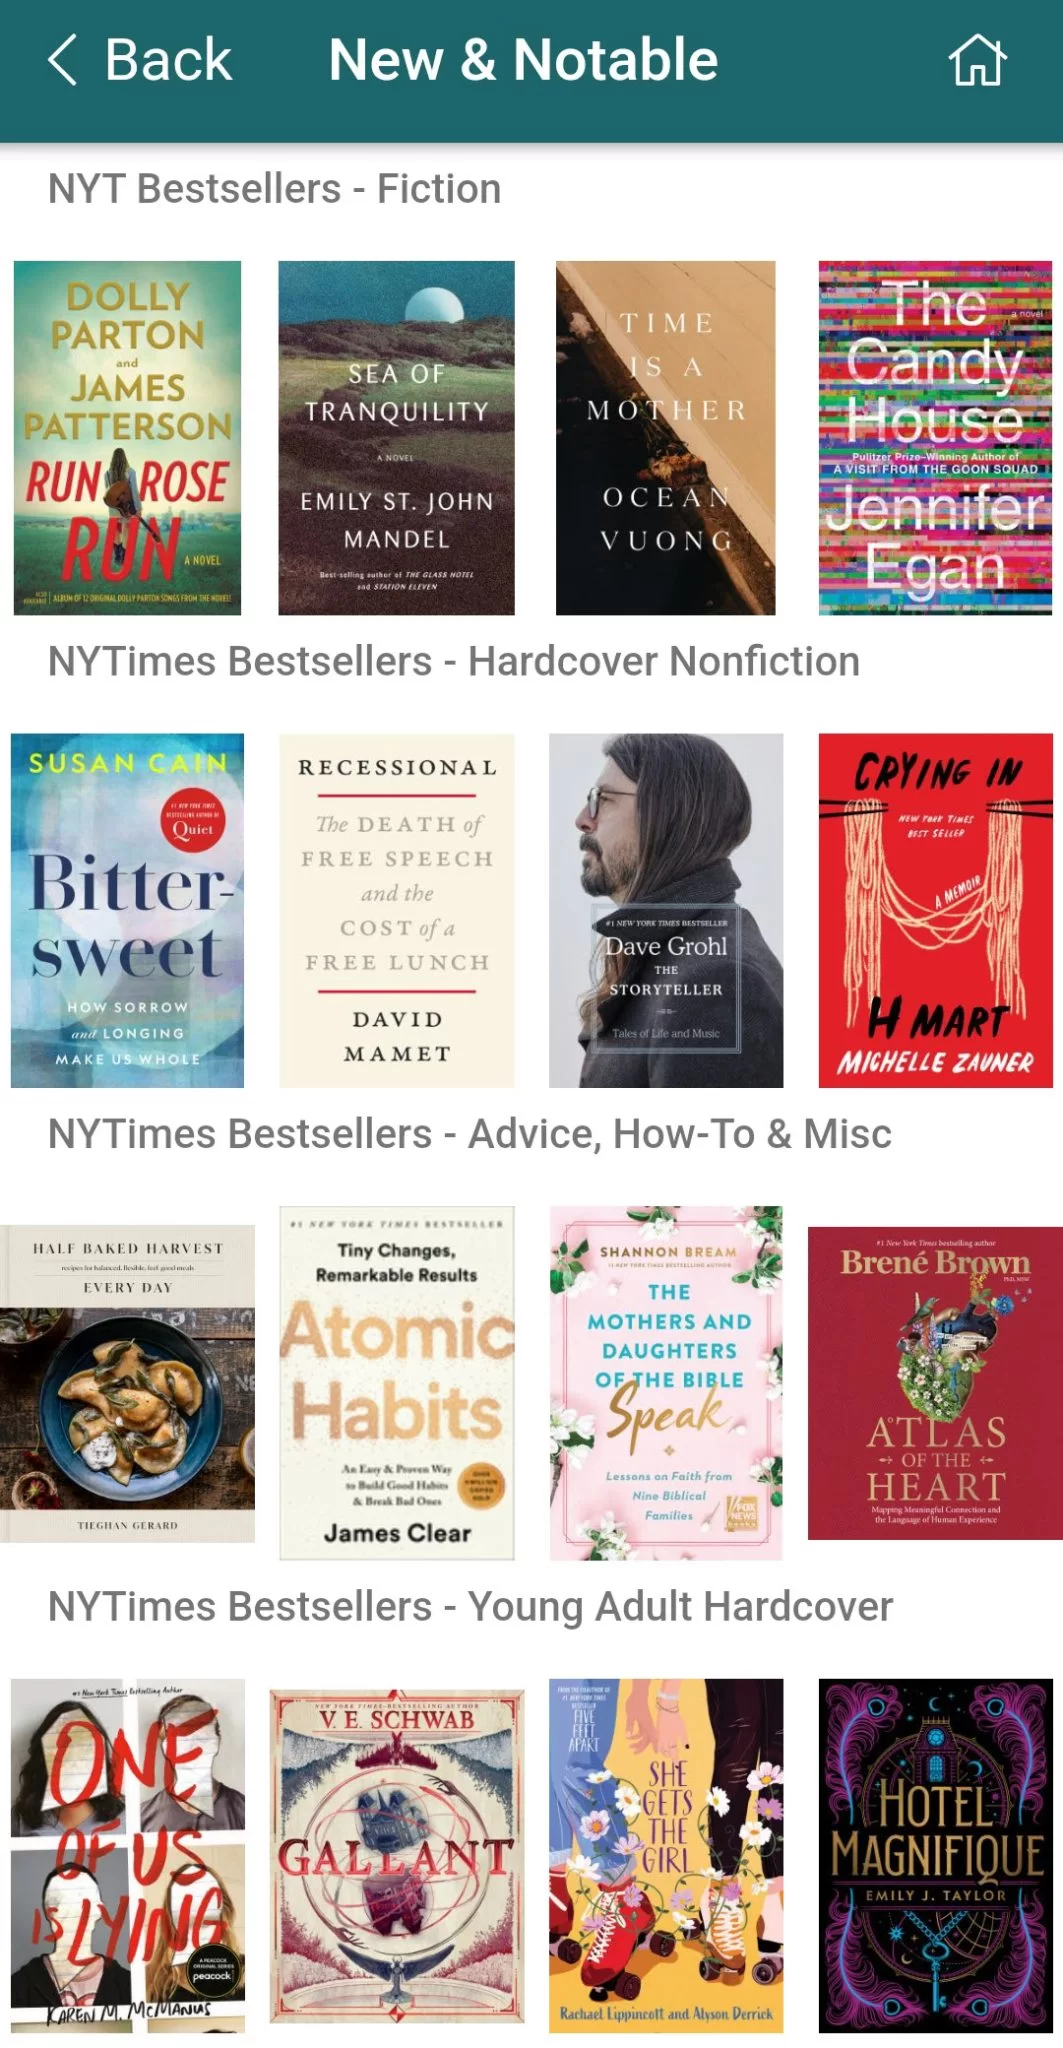 New and notable book lists. Screenshot.